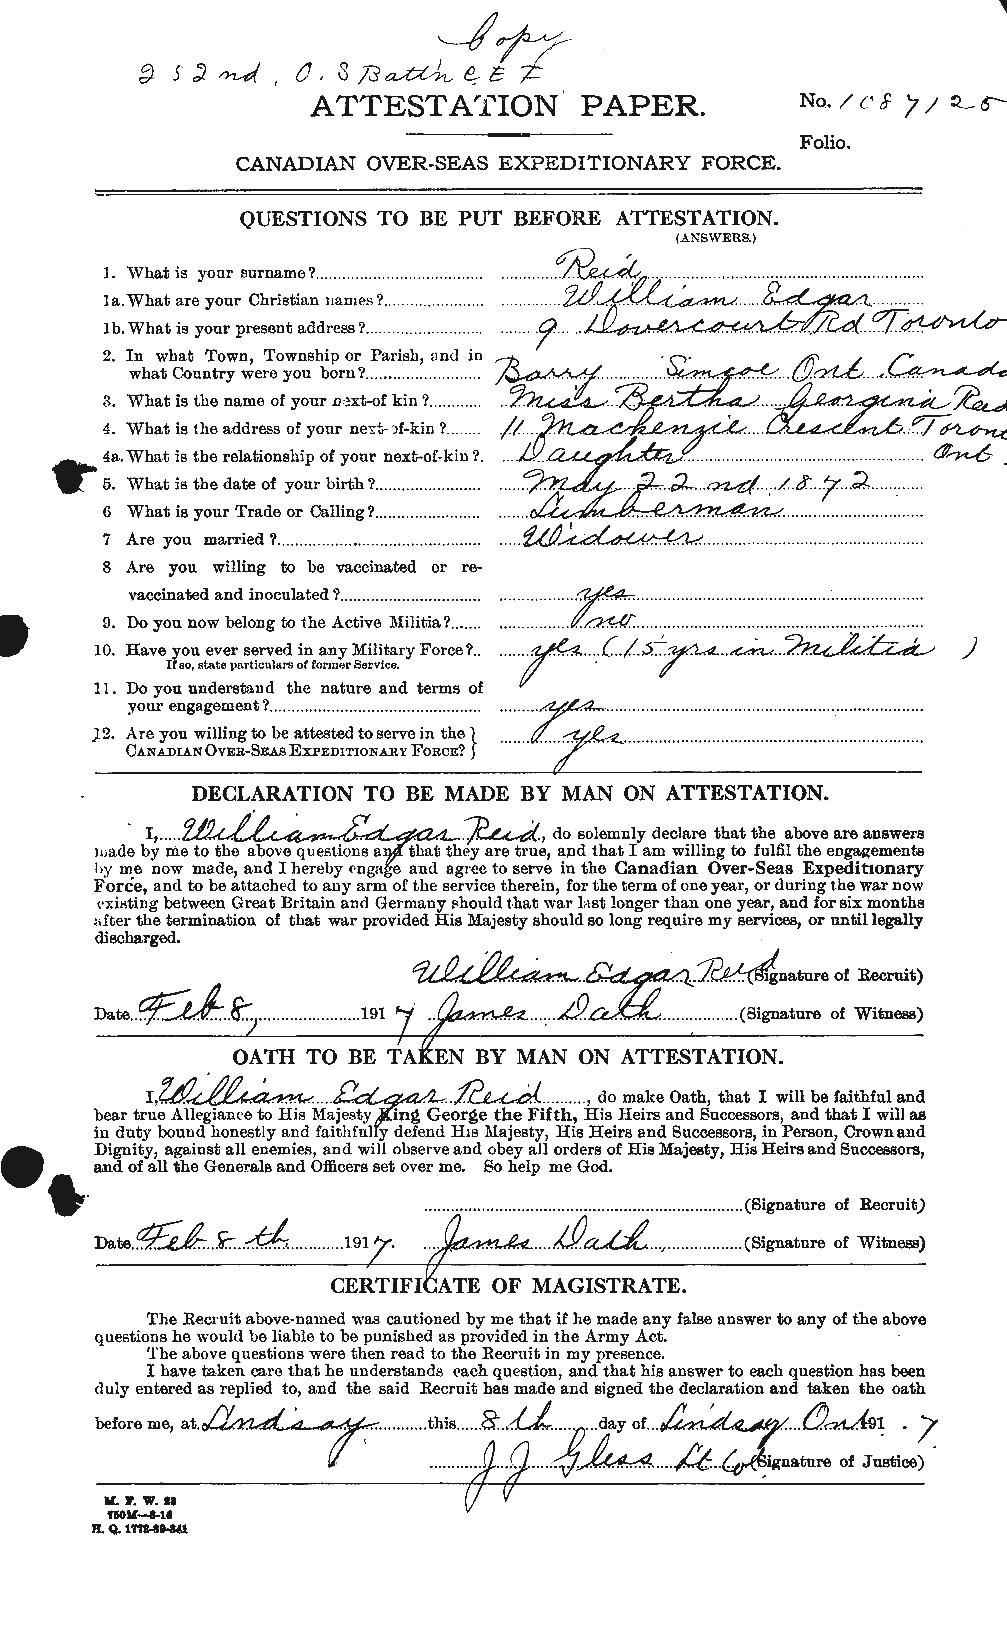 Personnel Records of the First World War - CEF 596981a